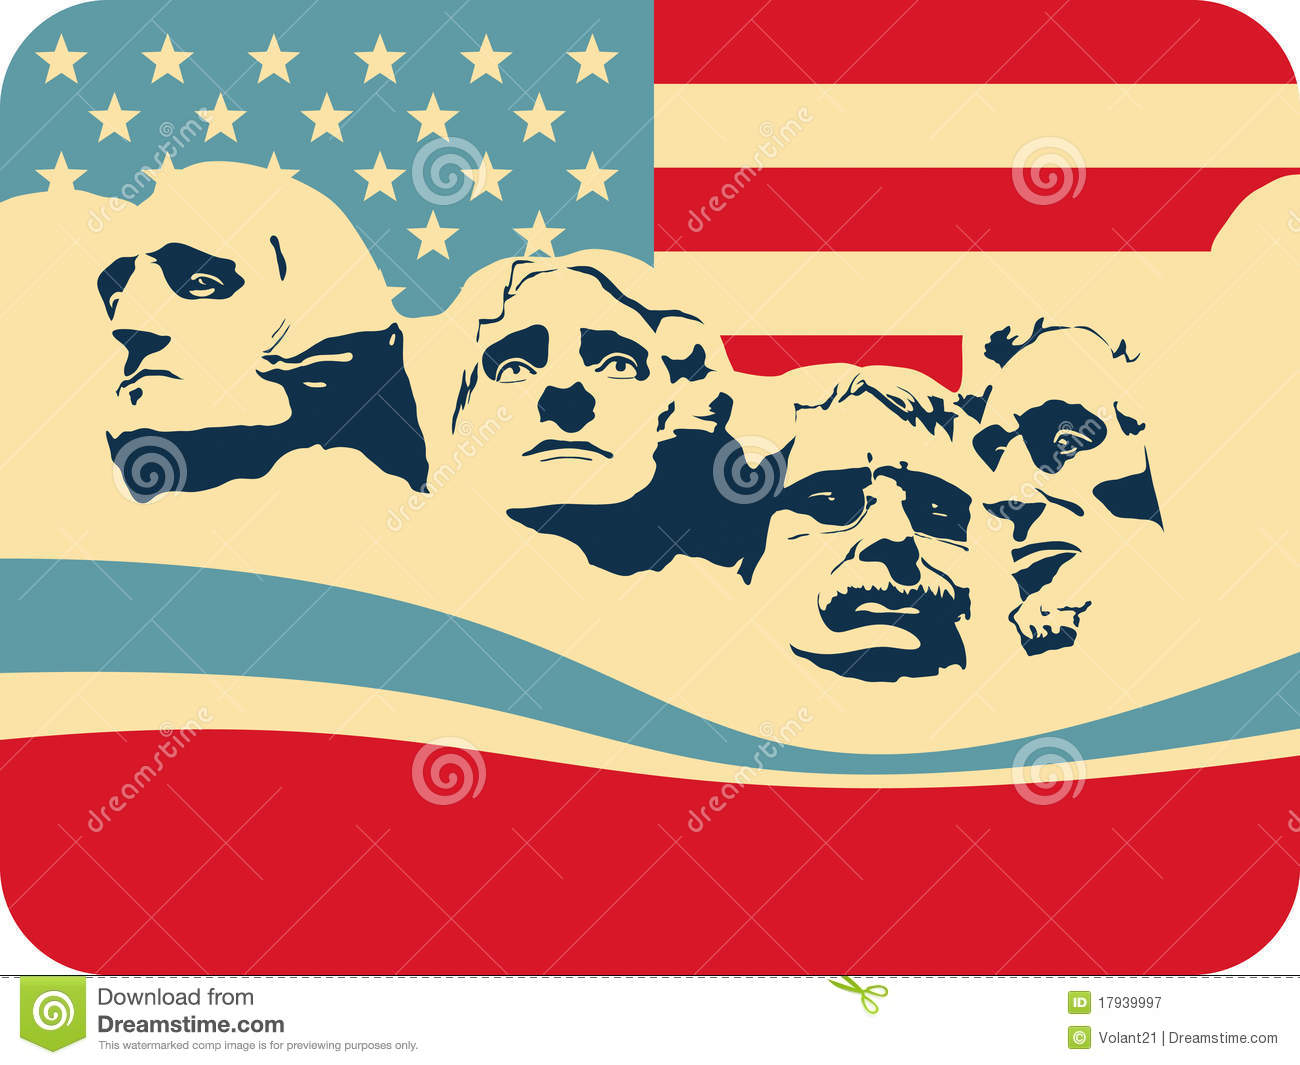 Mount Rushmore Royalty Free Stock Photography   Image  17939997